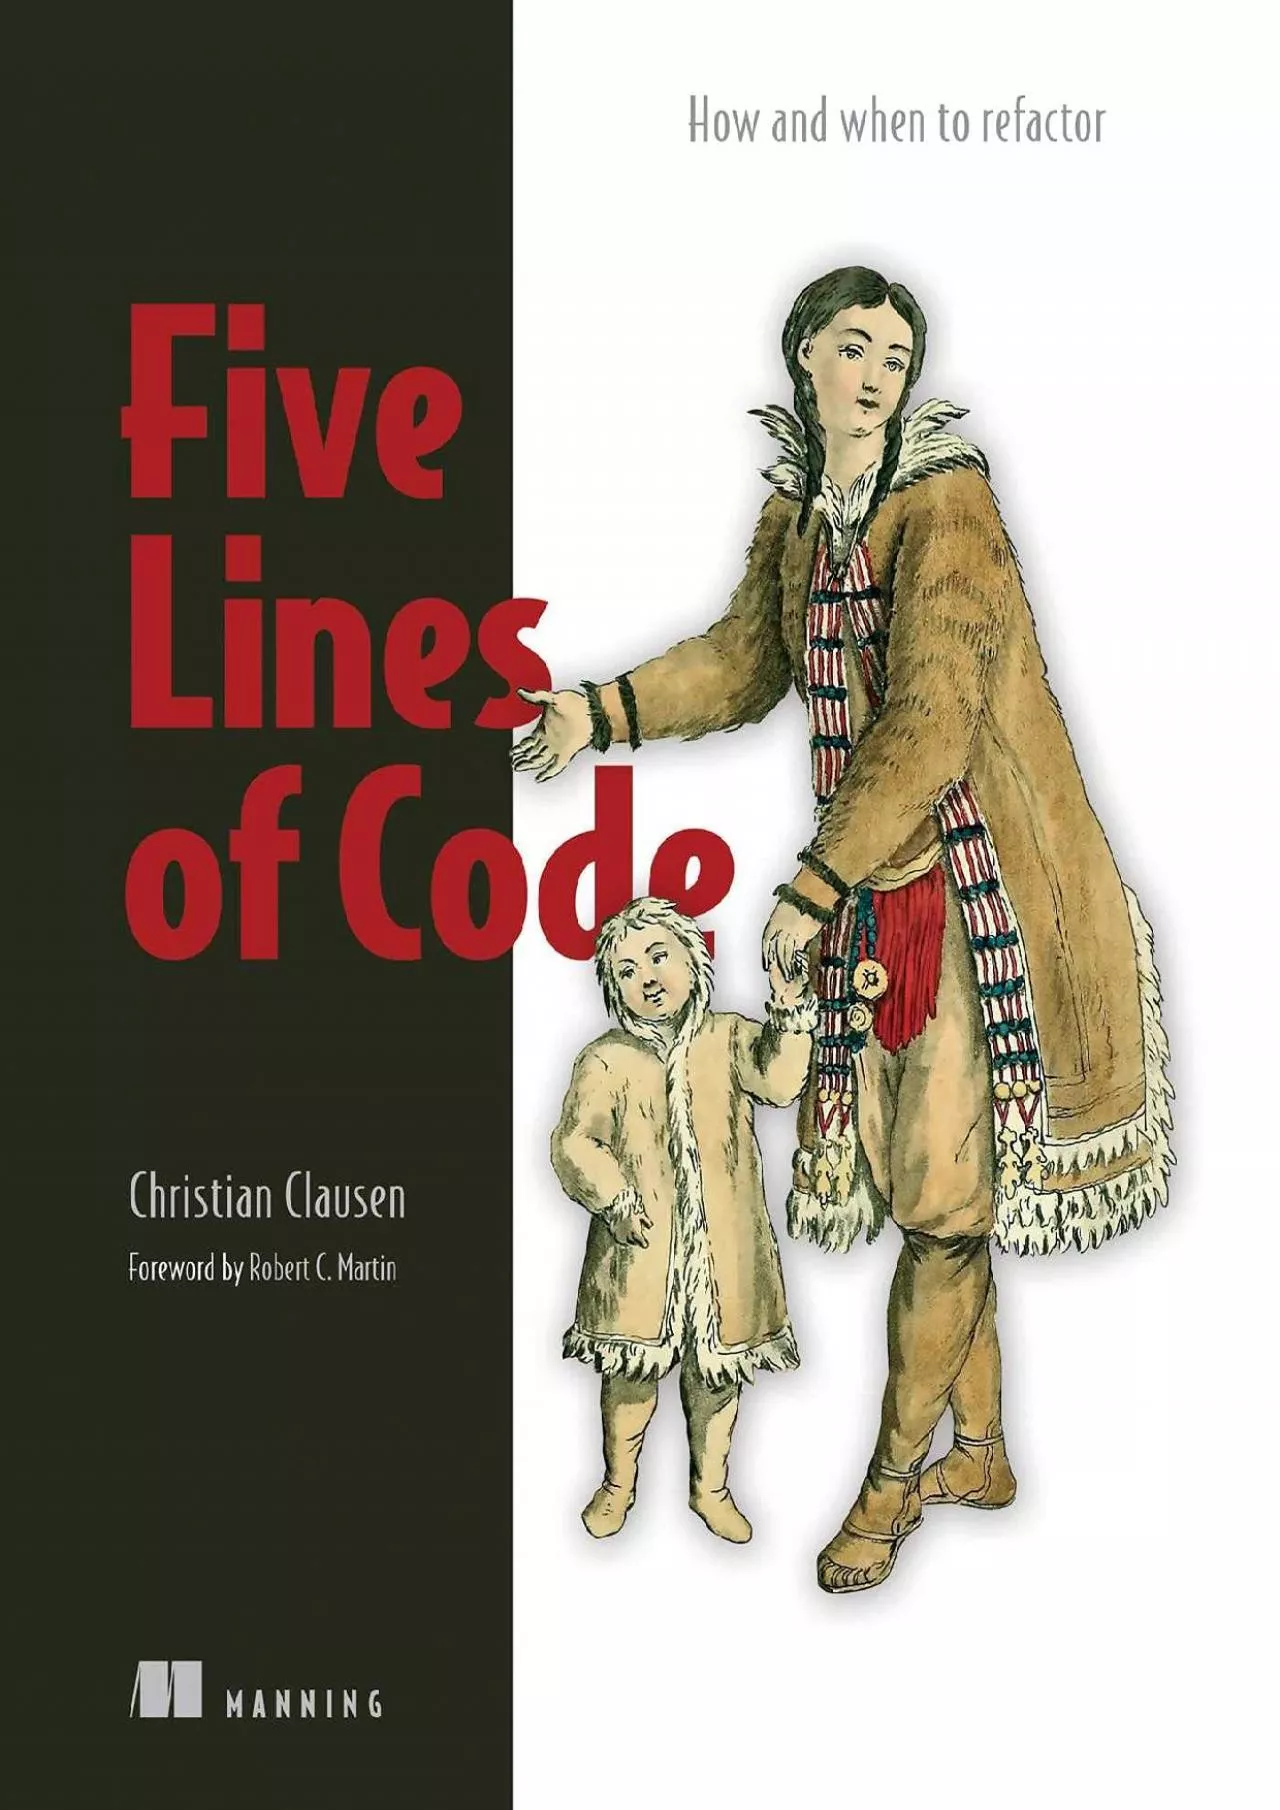 [READING BOOK]-Five Lines of Code: How and when to refactor